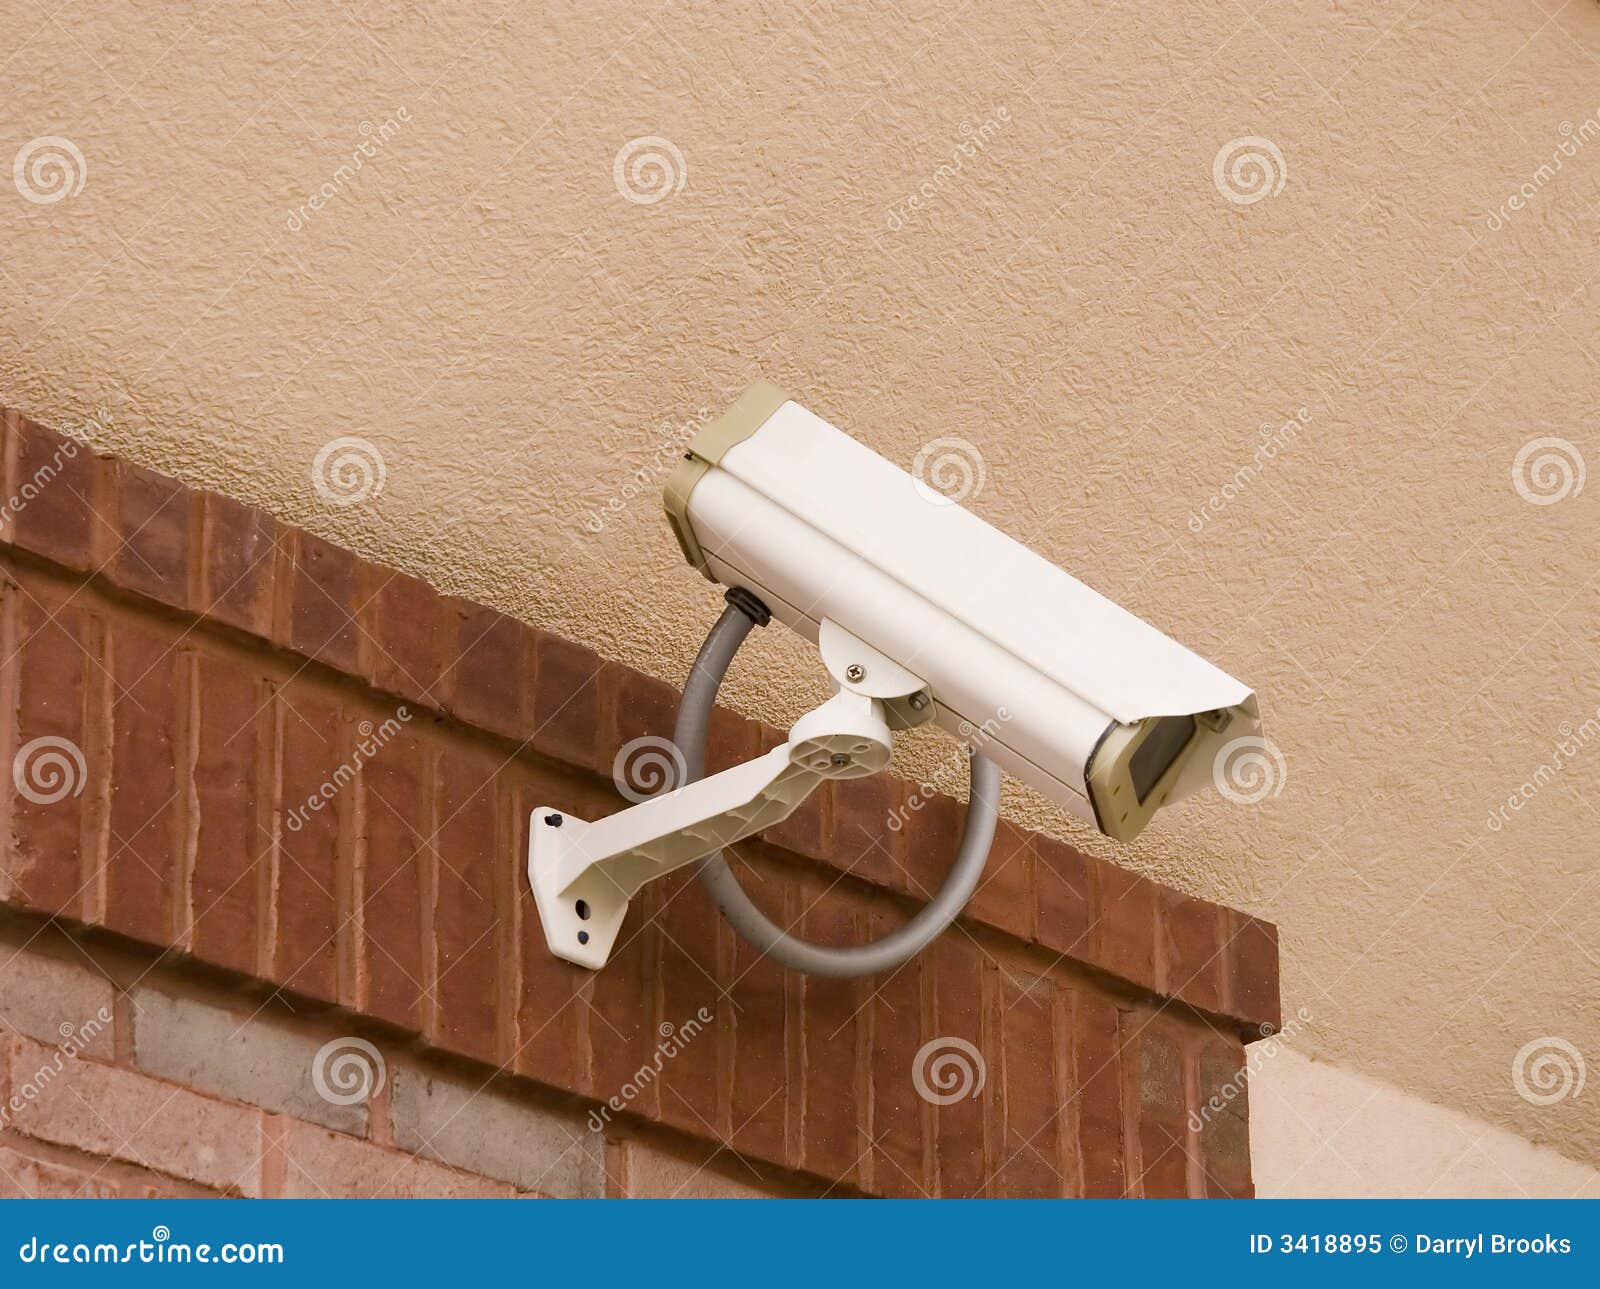 Security Camera on Stucco. A security camera on brick and stucco wall